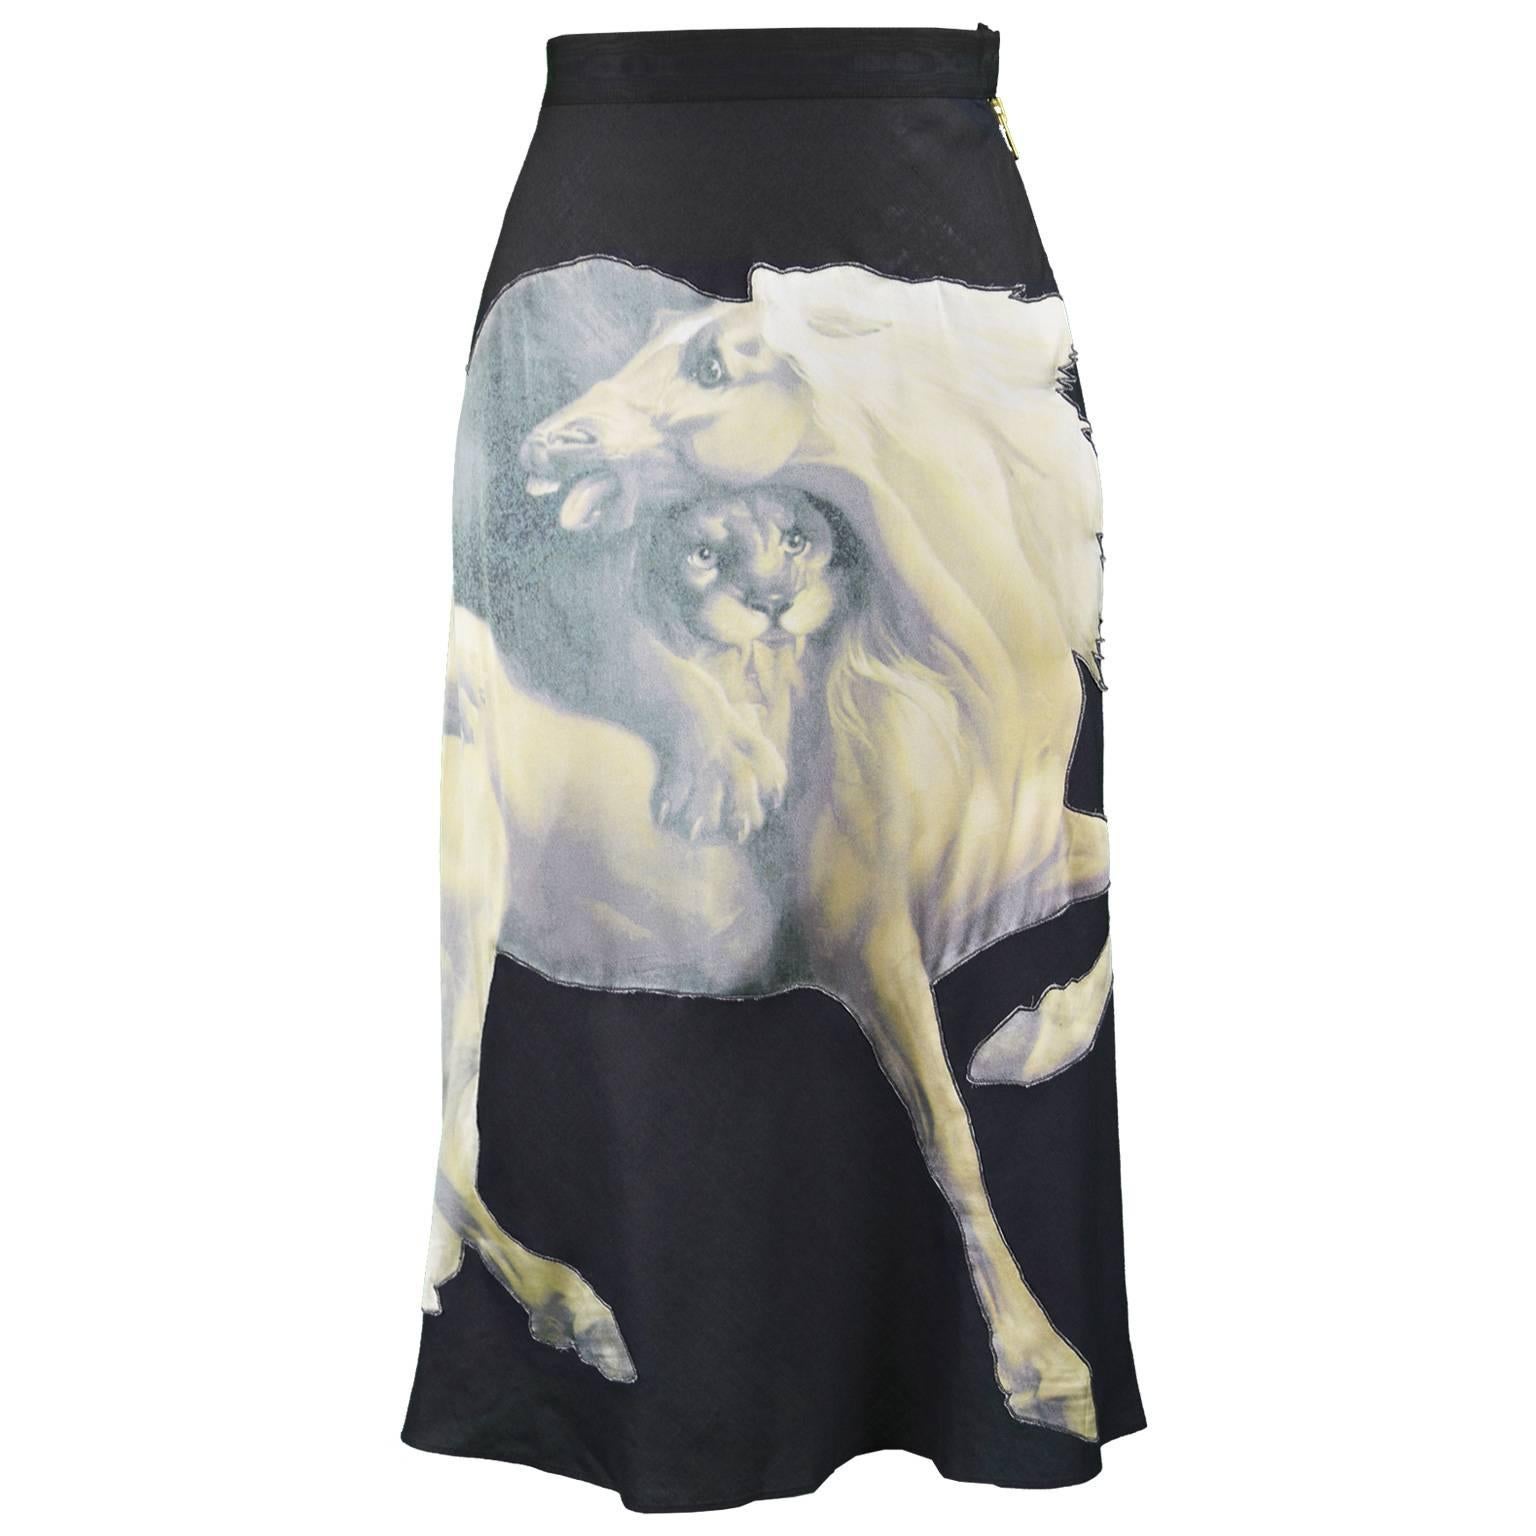 Chloe by Stella McCartney Skirt with George Stubbs Horse Appliqué, S/S 2001